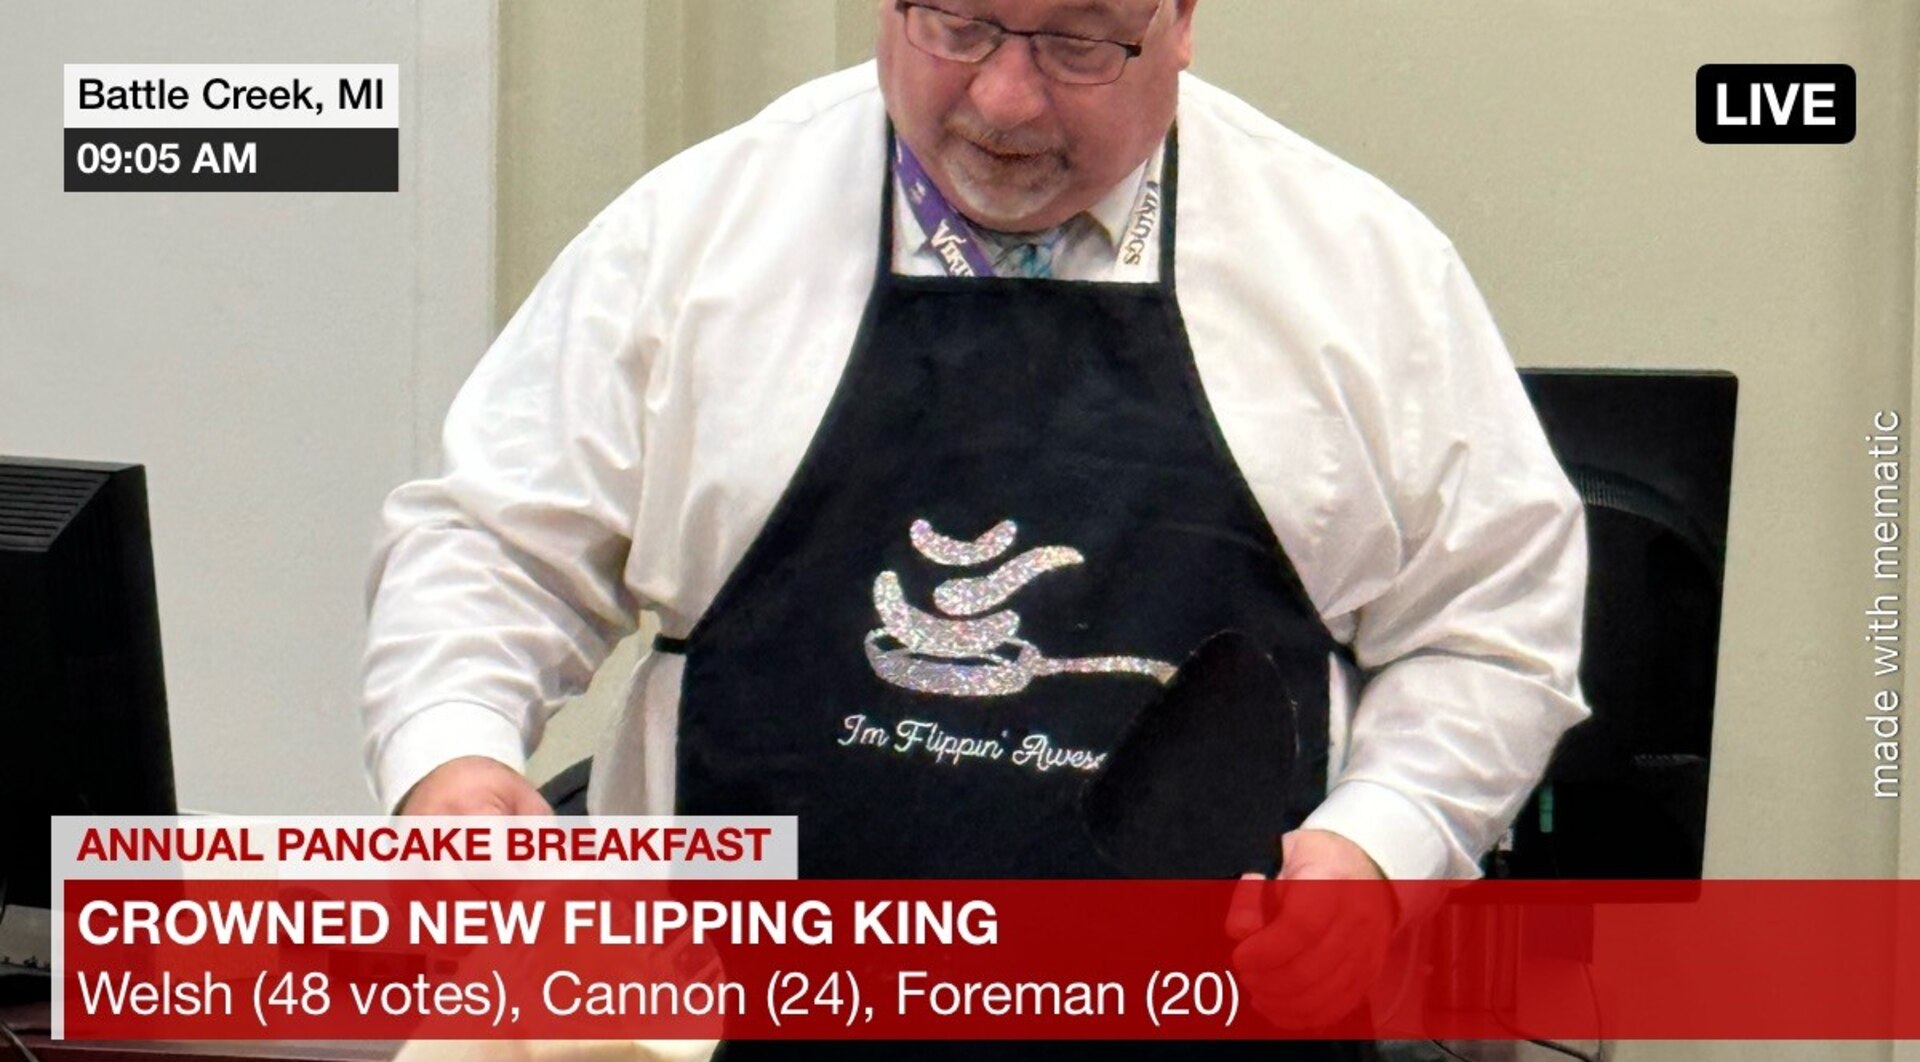 Fake news feed reading annual pancake breakfast live update. Crowned new flipping king Welsh (48 votes), Cannon (24), Foreman (20)